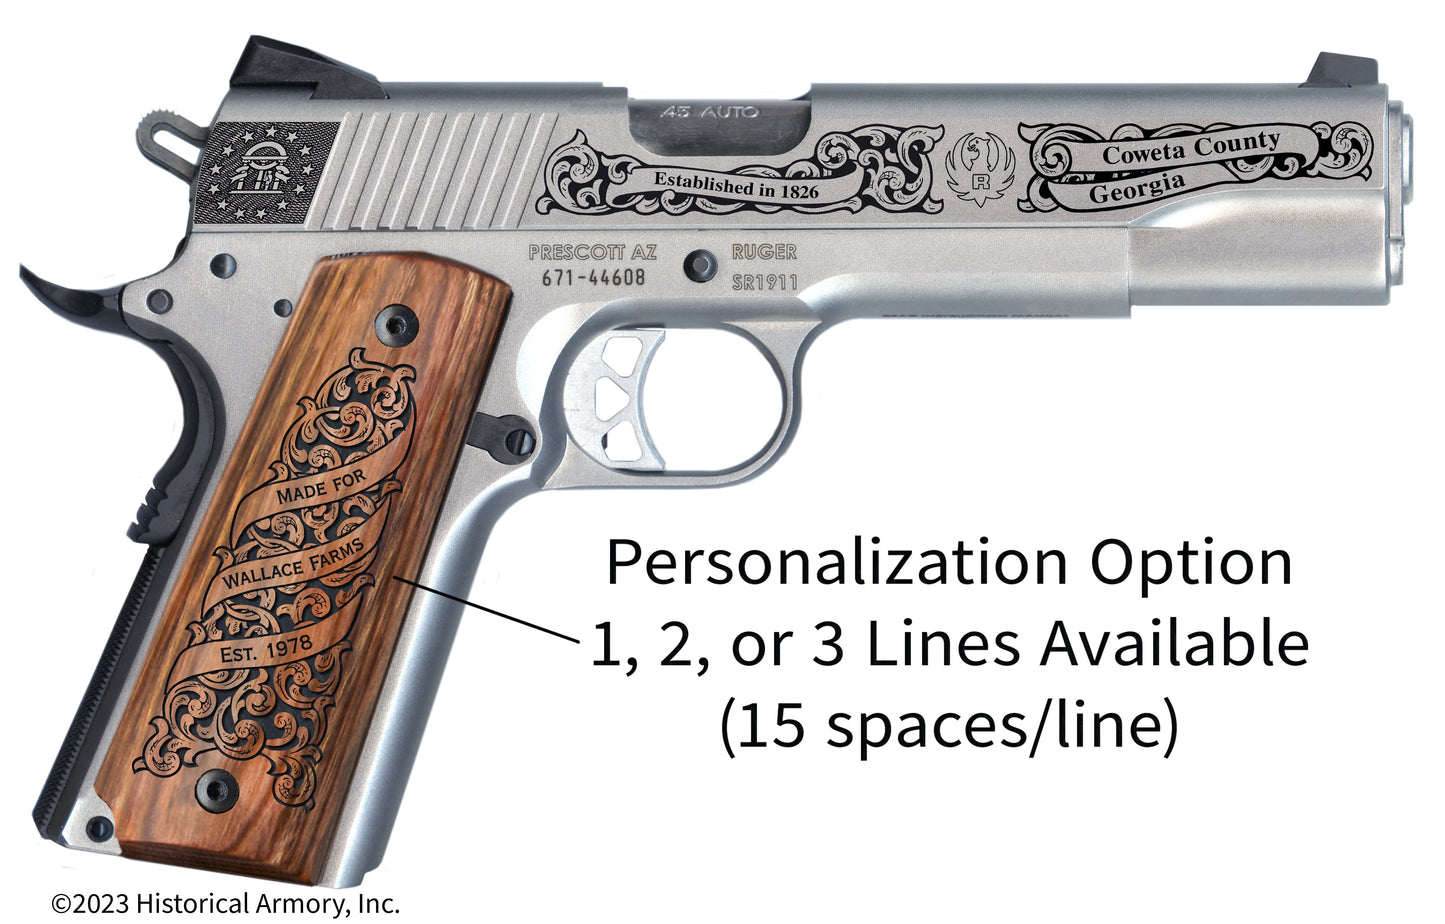 Coweta County Georgia Personalized Engraved .45 Auto Ruger 1911